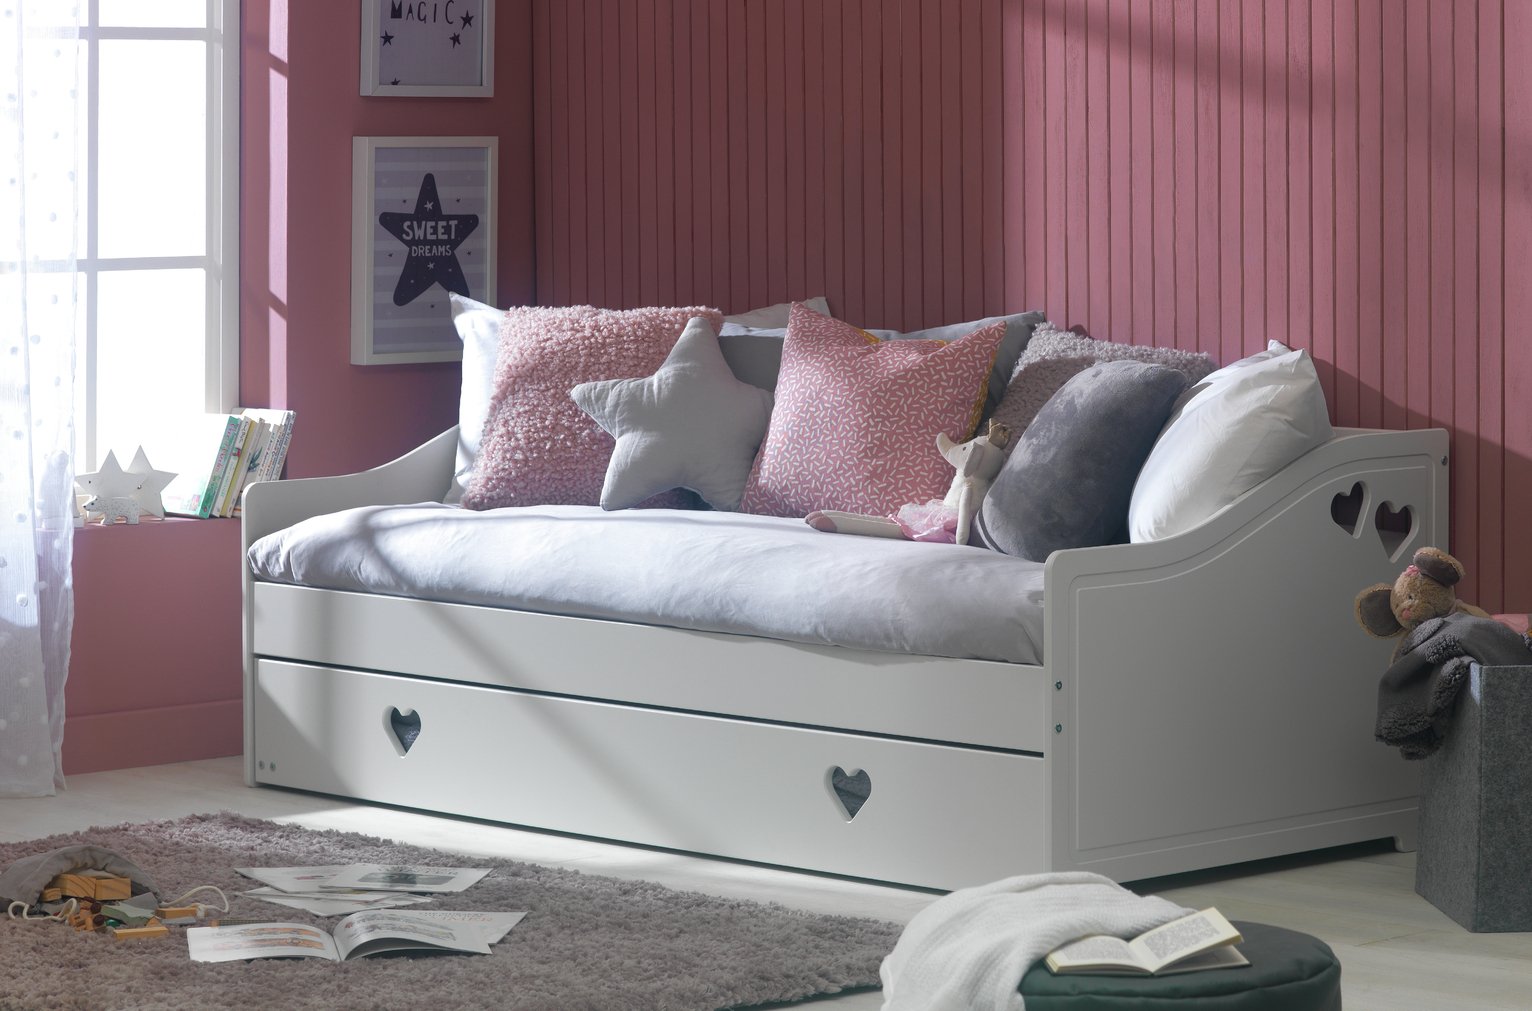 Argos Home Mia Day Bed, Trundle and 2 Kids Mattresses -White Review